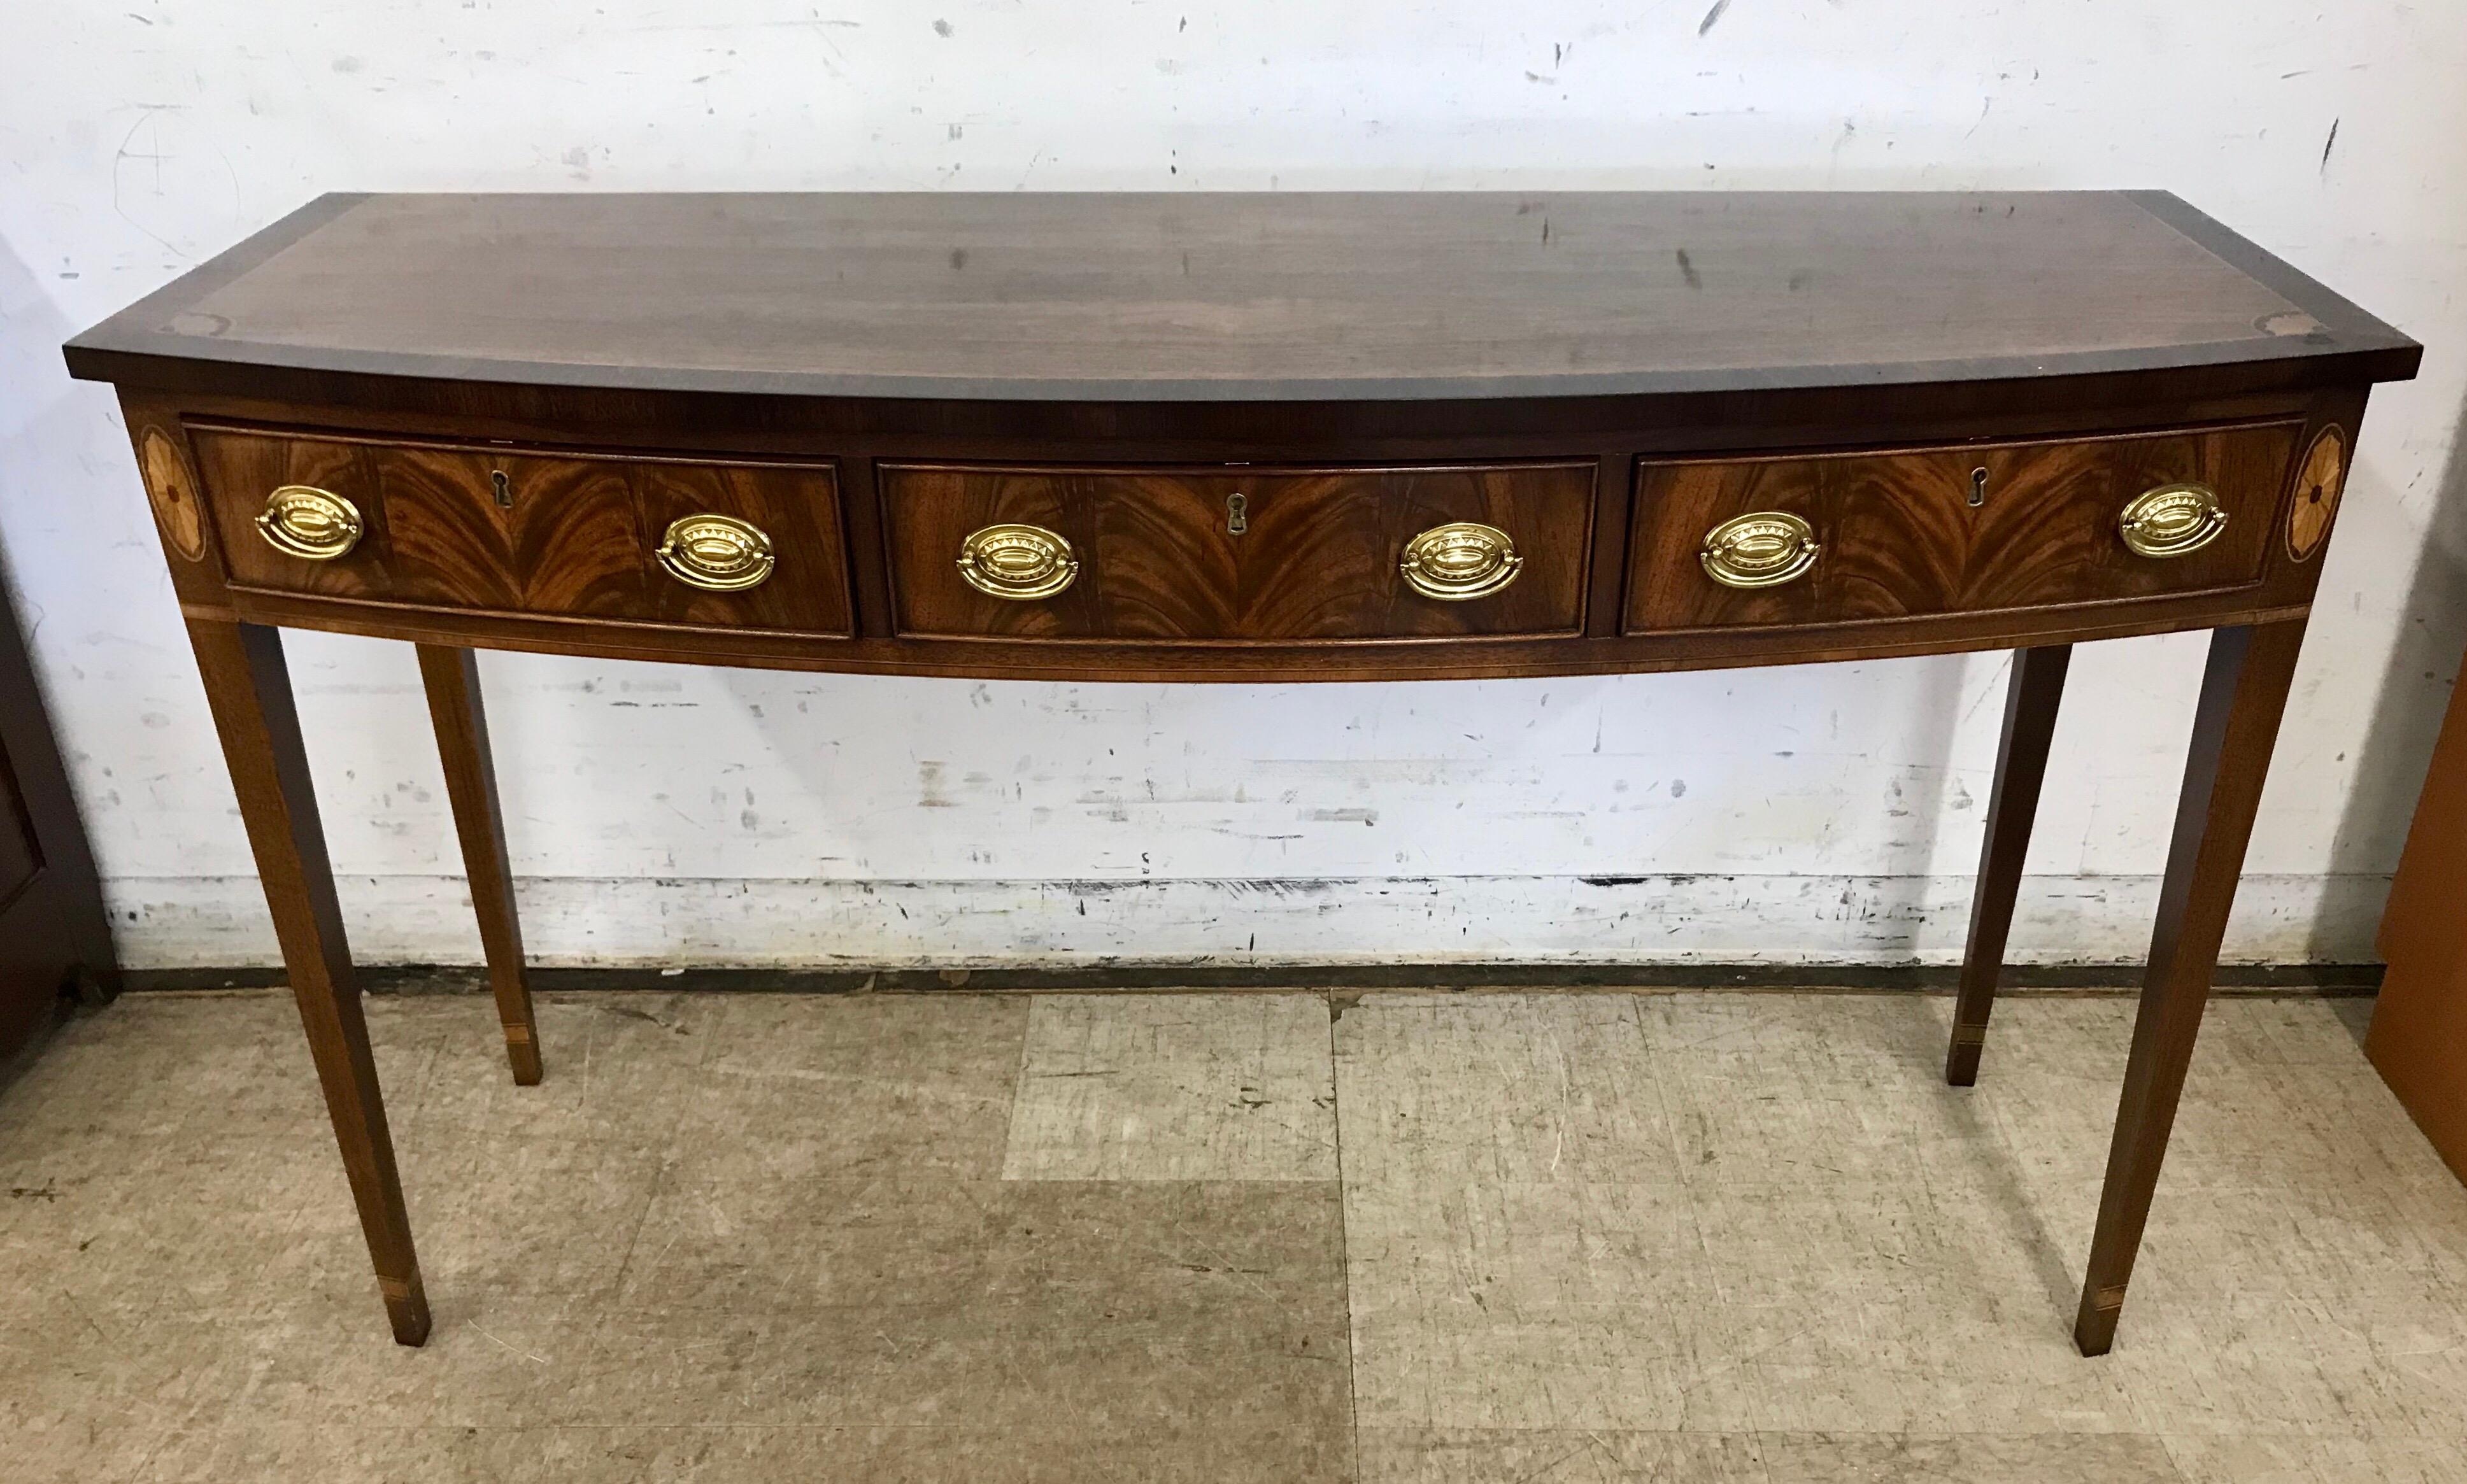 Beautiful flame mahogany sideboard with line and oval inlays. It is remarkably sturdy with three drawers that feature handcut dovetails and brass pulls all on firm square tapered legs. Center drawer is felt lined to store silver flatware.